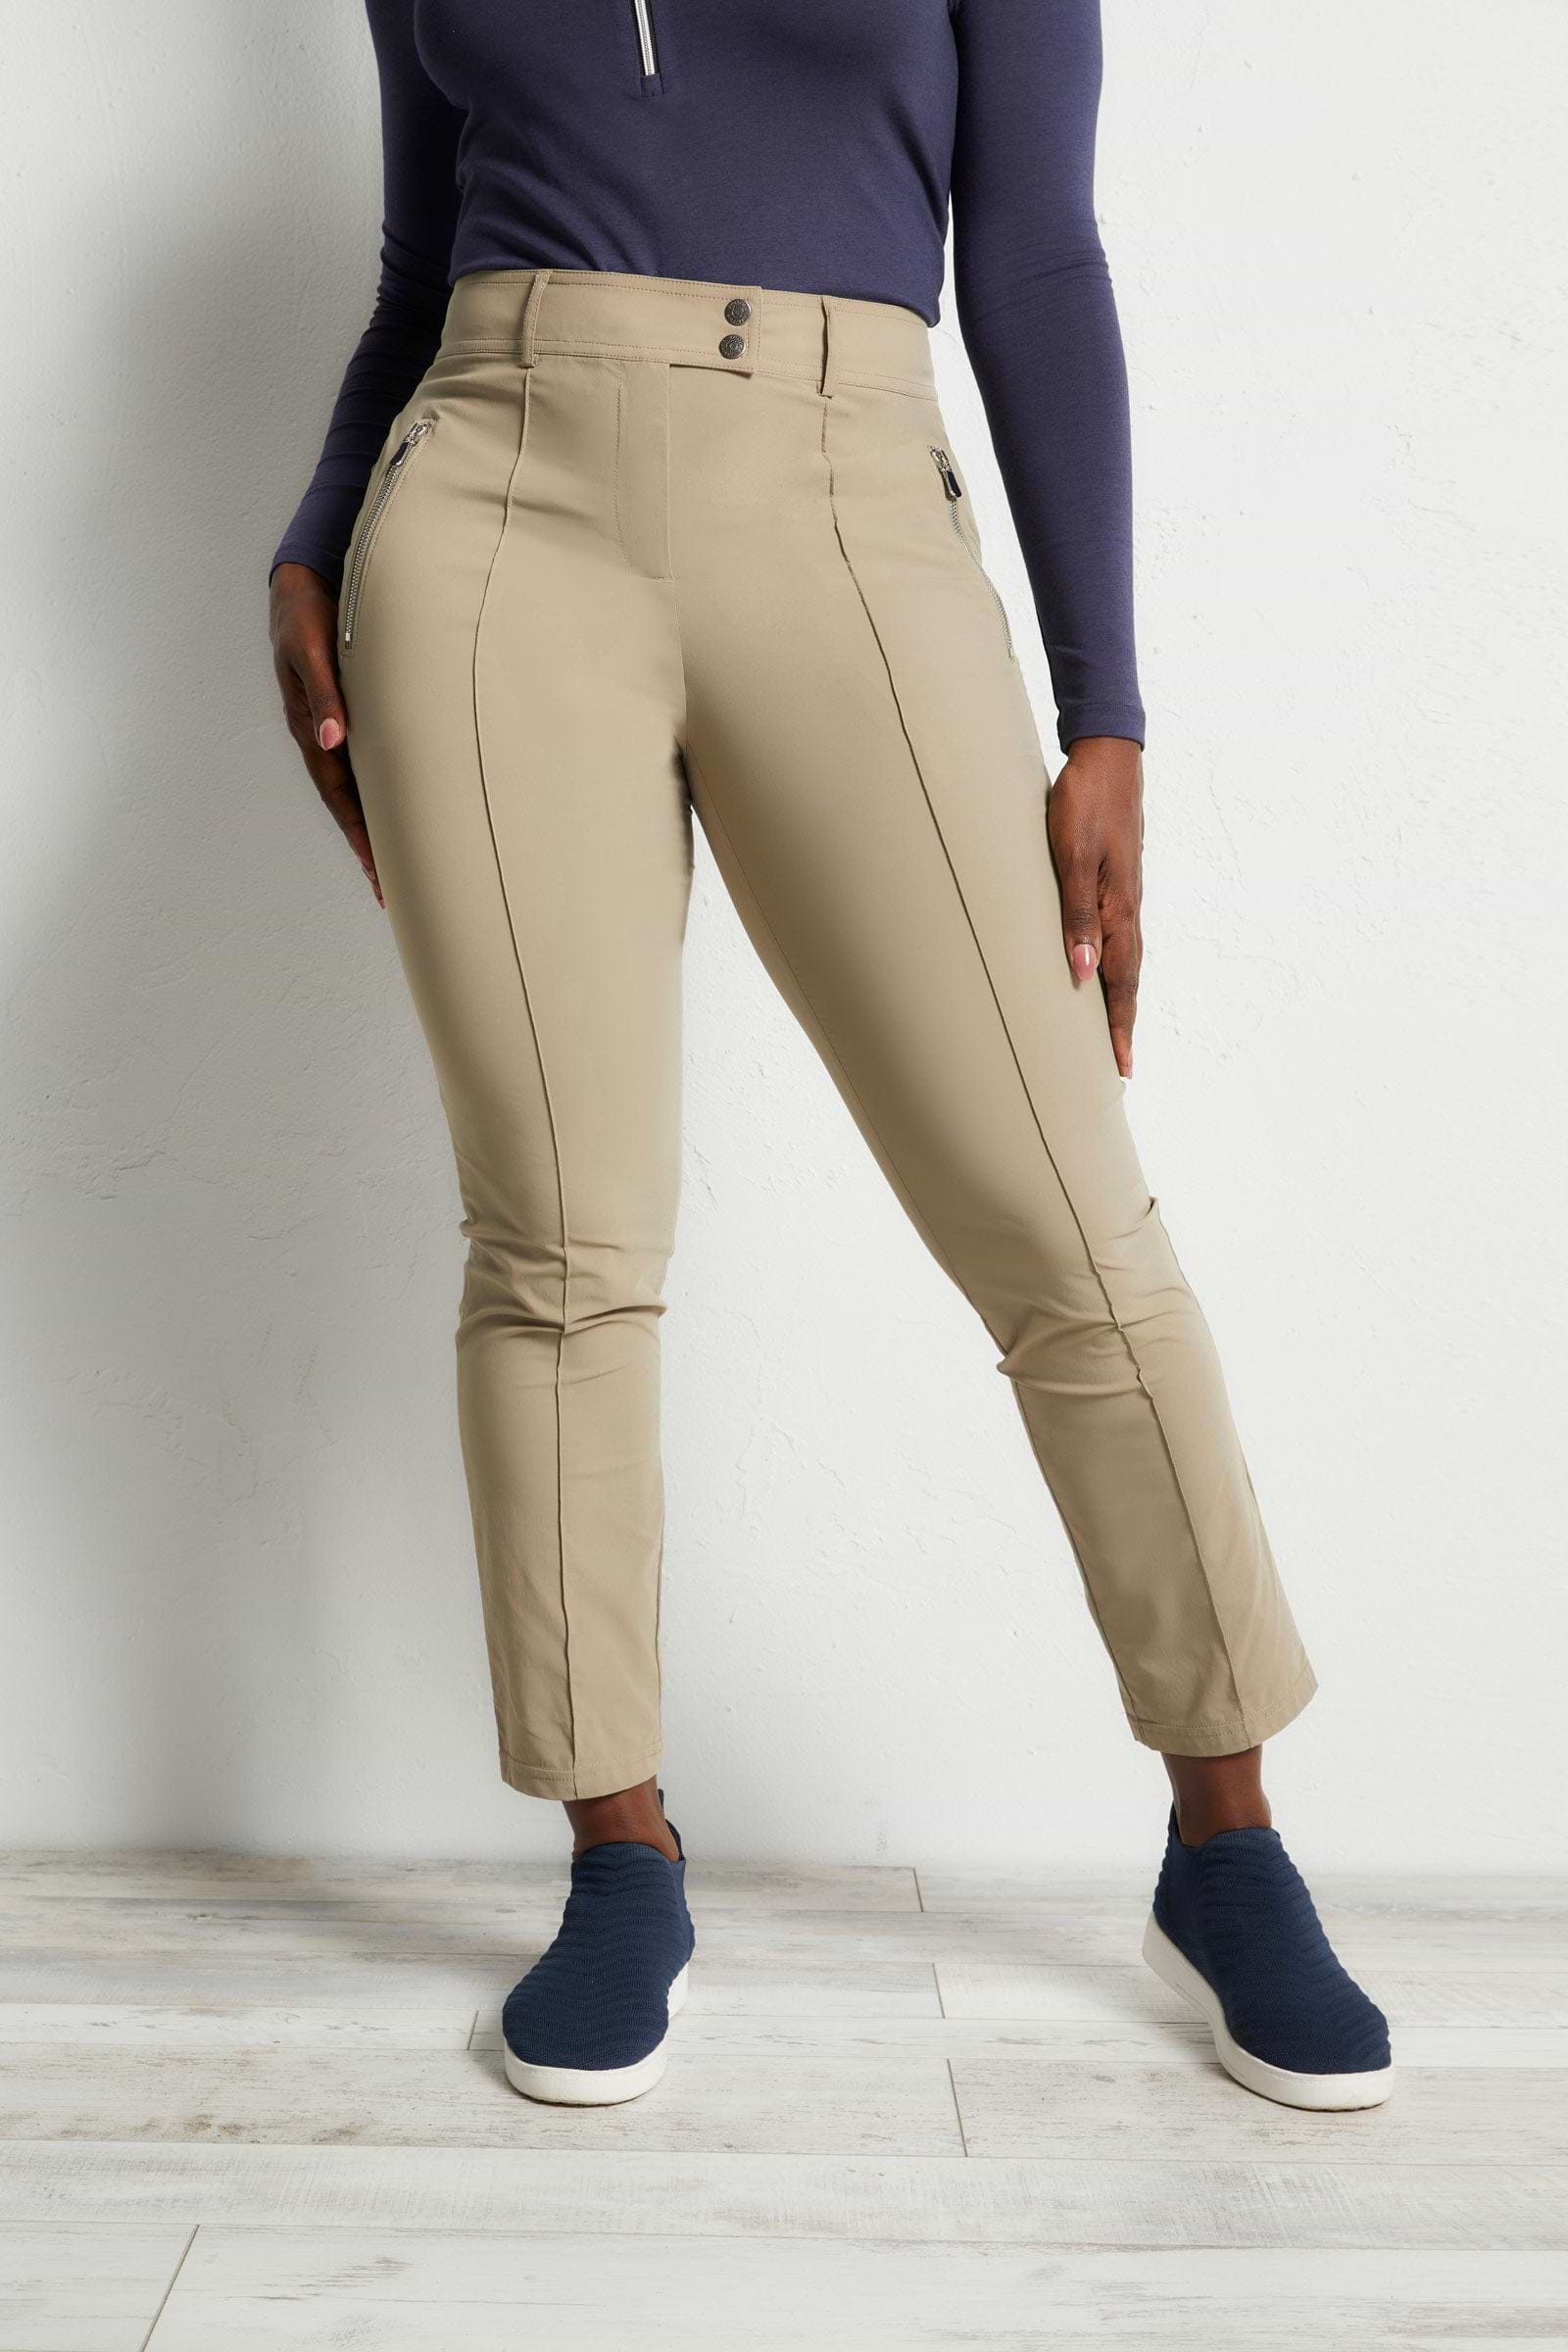 The Best Travel Pants. Front Profile of the Peggy Zippered Pant in Khaki